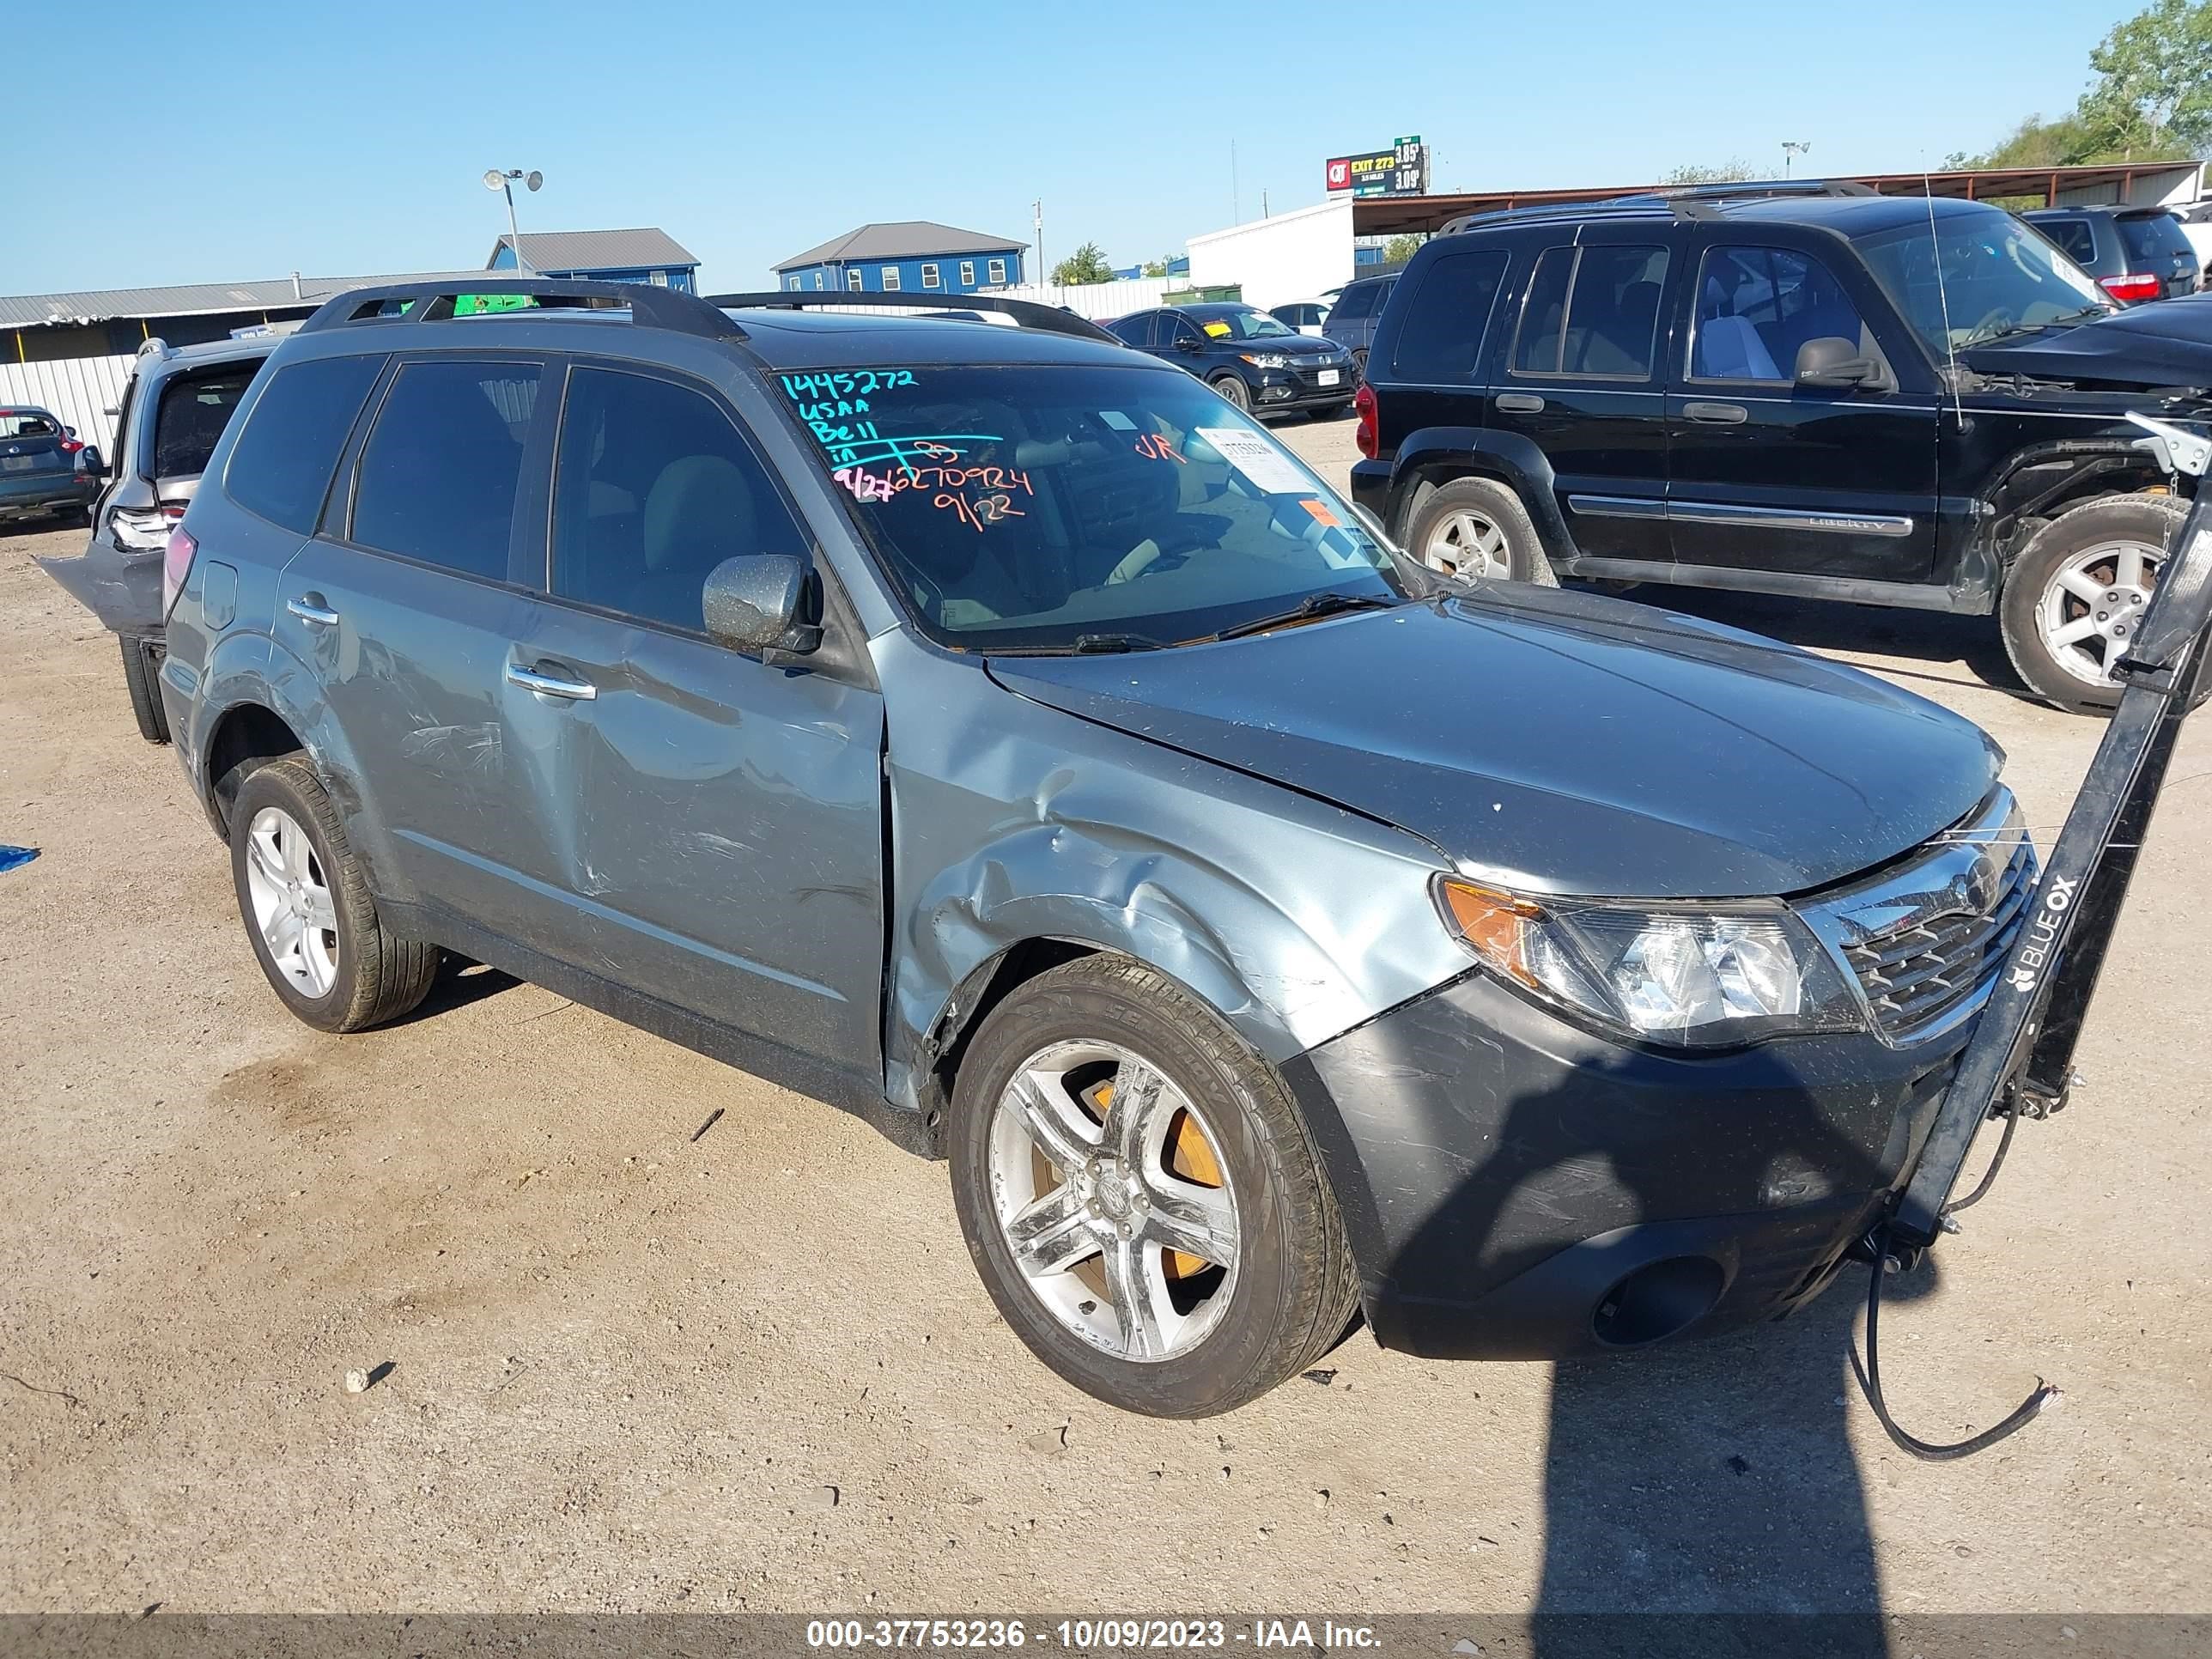 vin: JF2SH6CCXAG710303 JF2SH6CCXAG710303 2010 subaru forester 2500 for Sale in 75172, 204 Mars Rd, Wilmer, Texas, USA